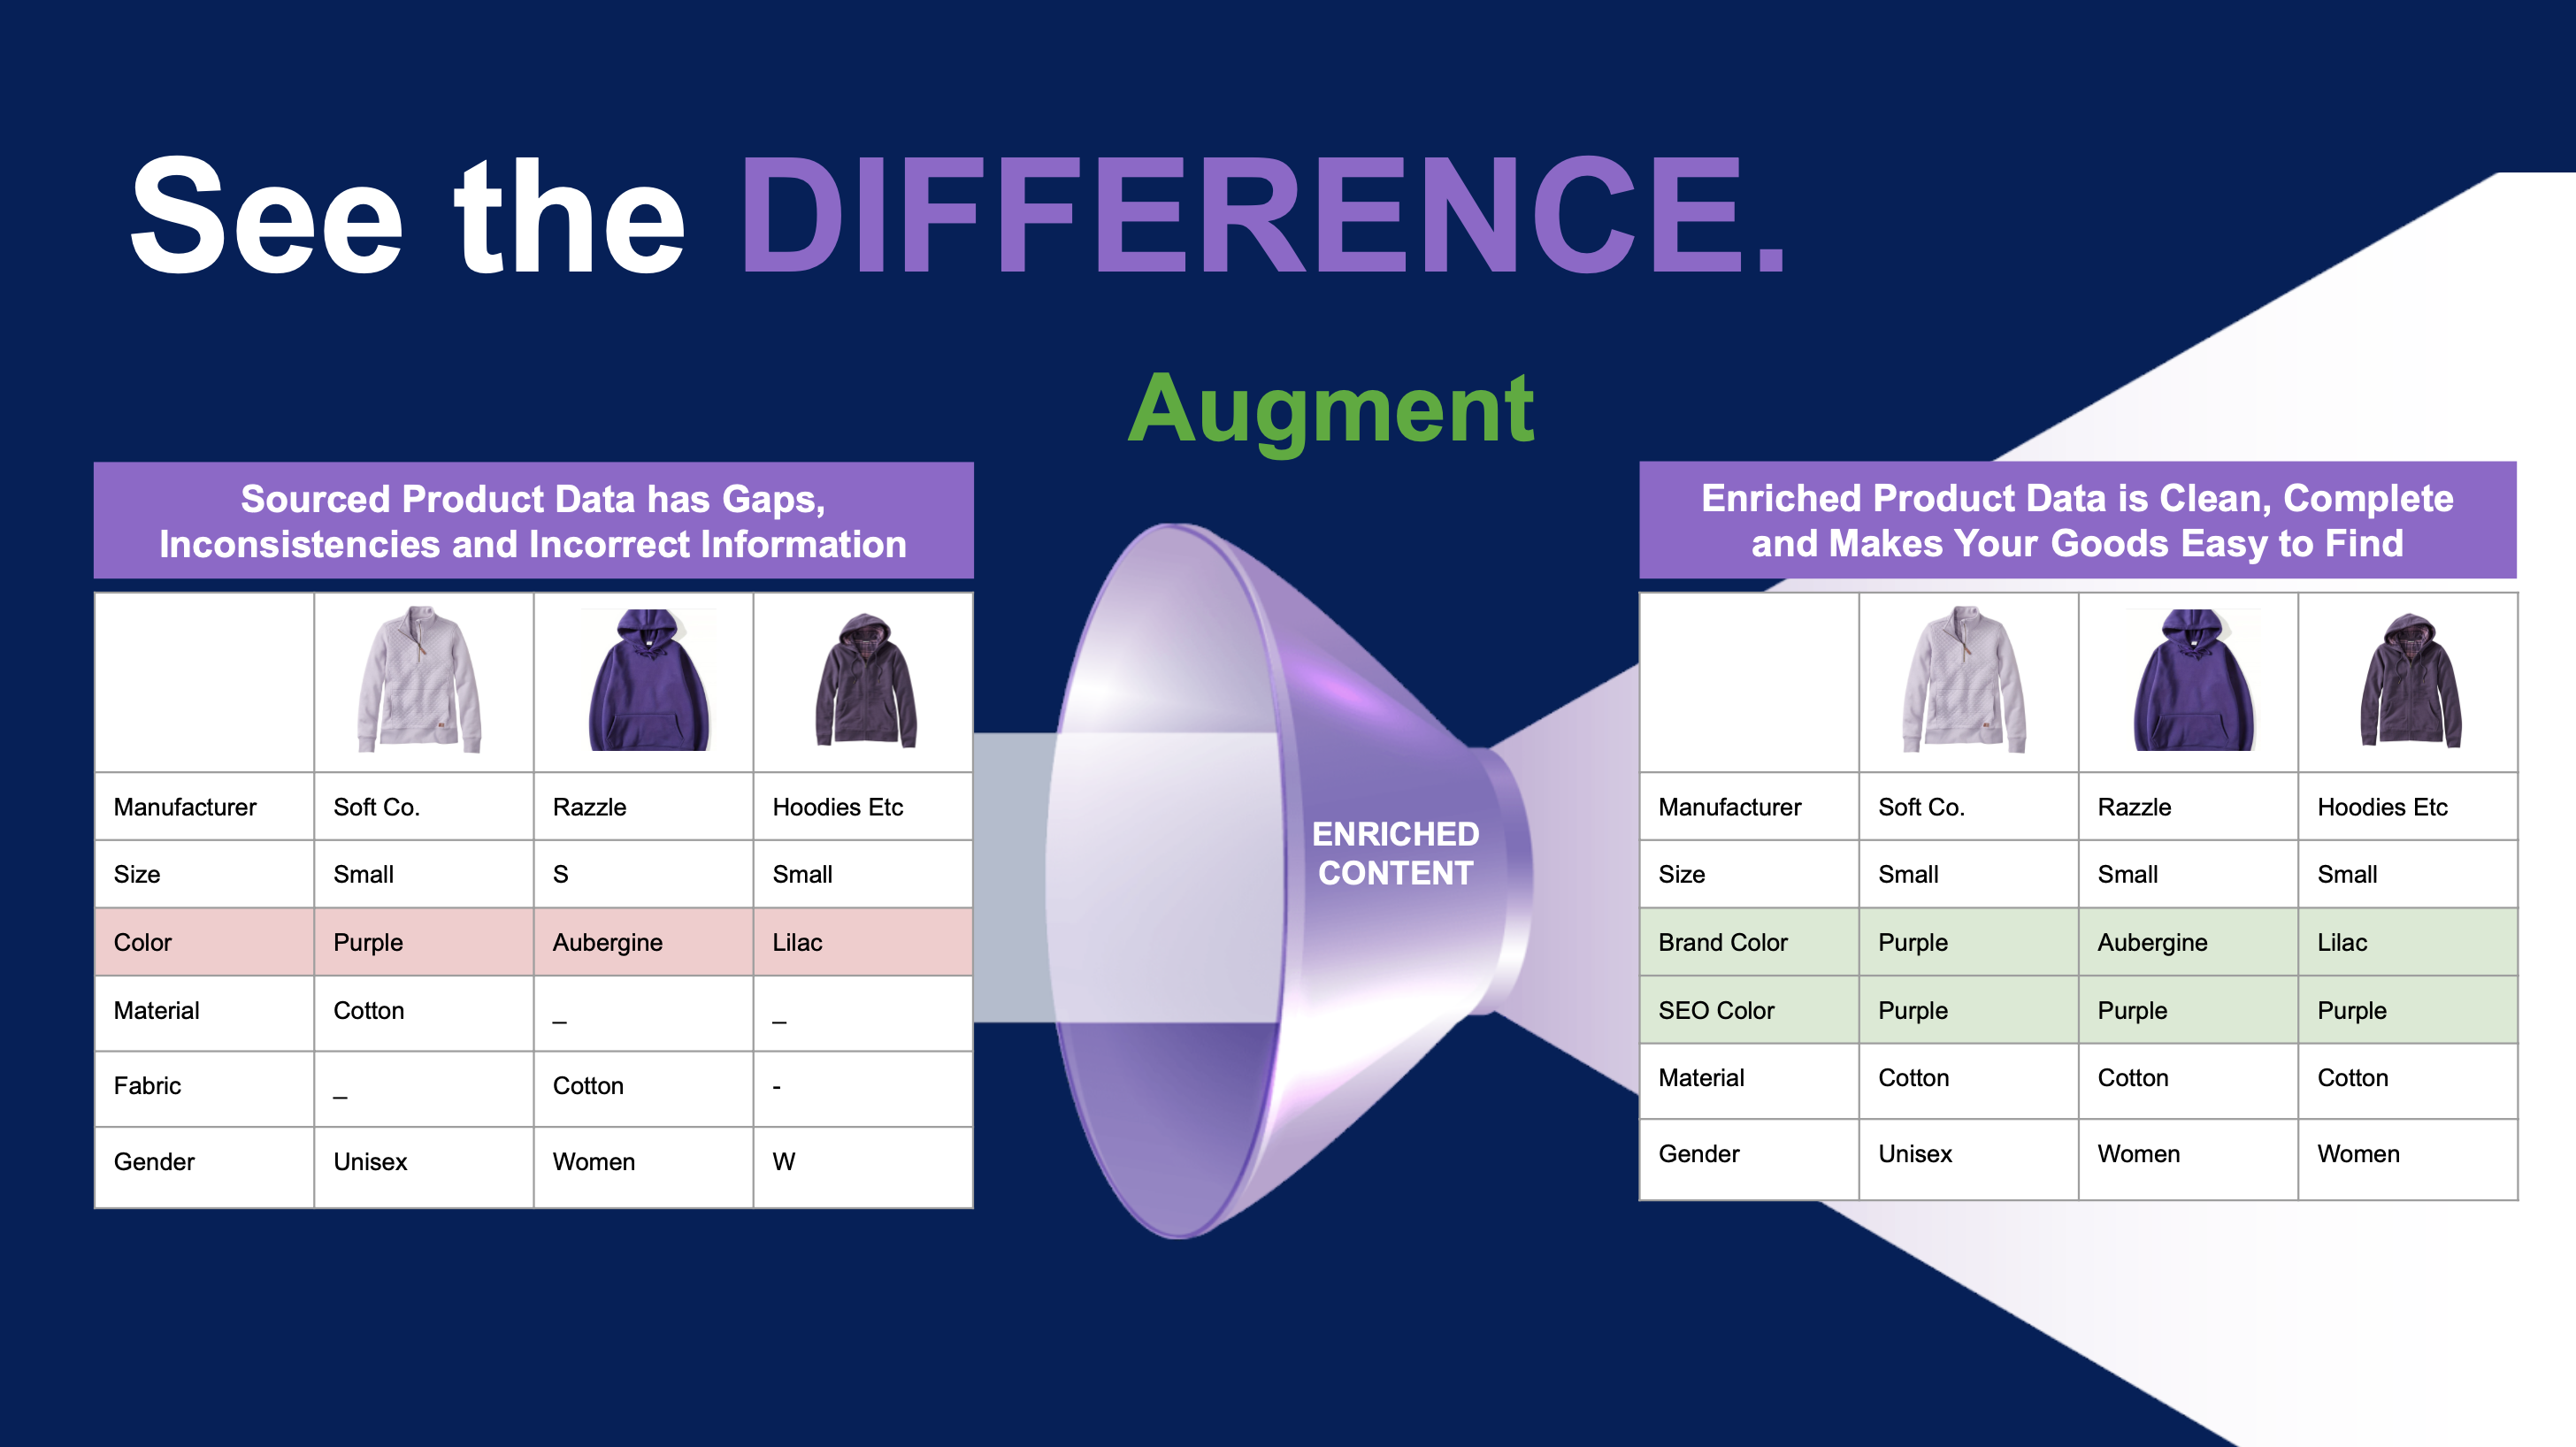 Augmenting the data fills in gaps that helps customers find similar products for comparisons.
